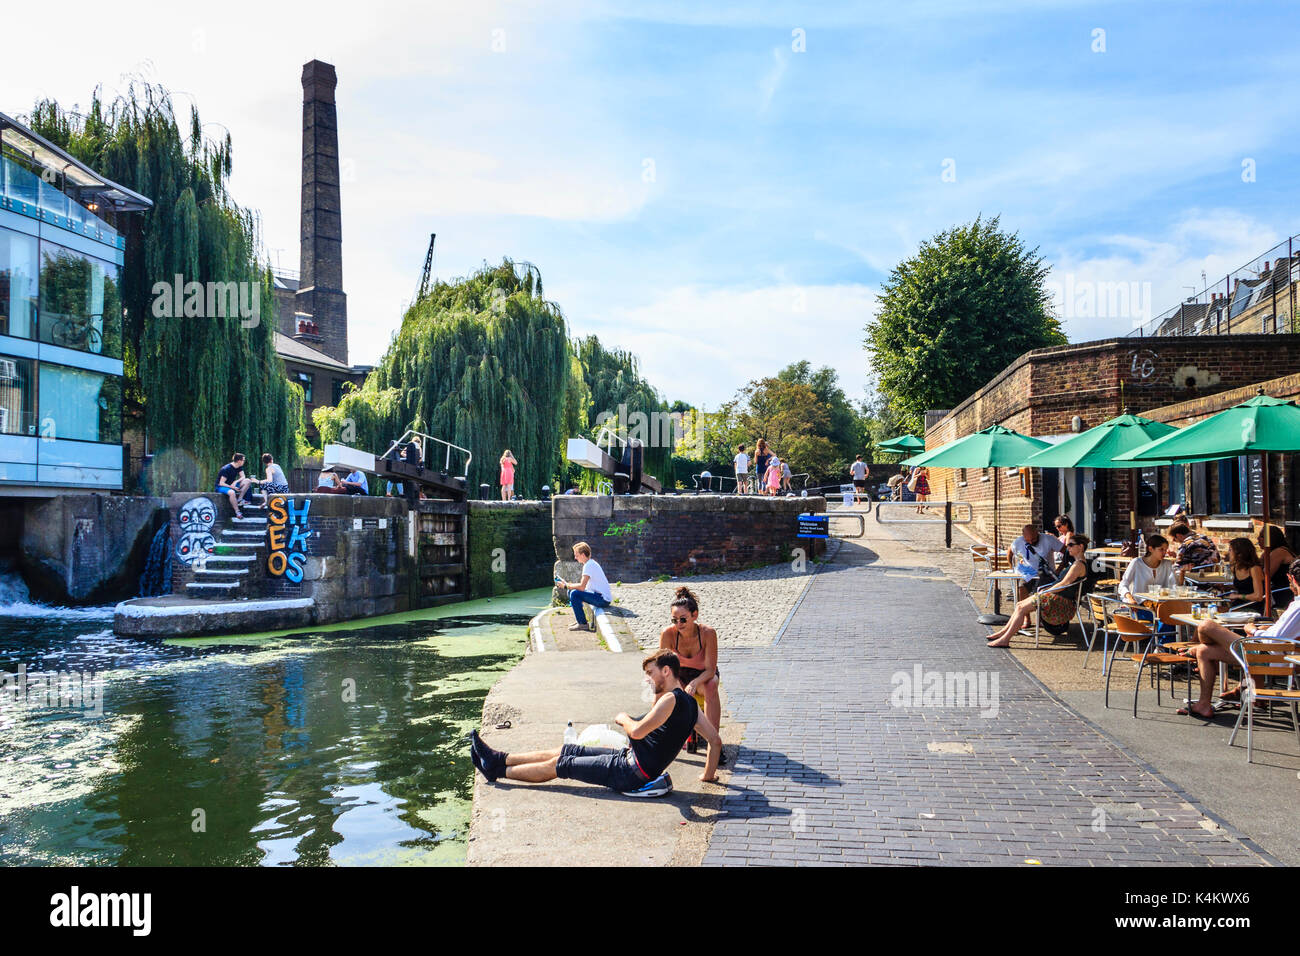 People basking in the sun and cooling off by the canal as temperatures rise, City Road Lock, Islington, London, UK Stock Photo